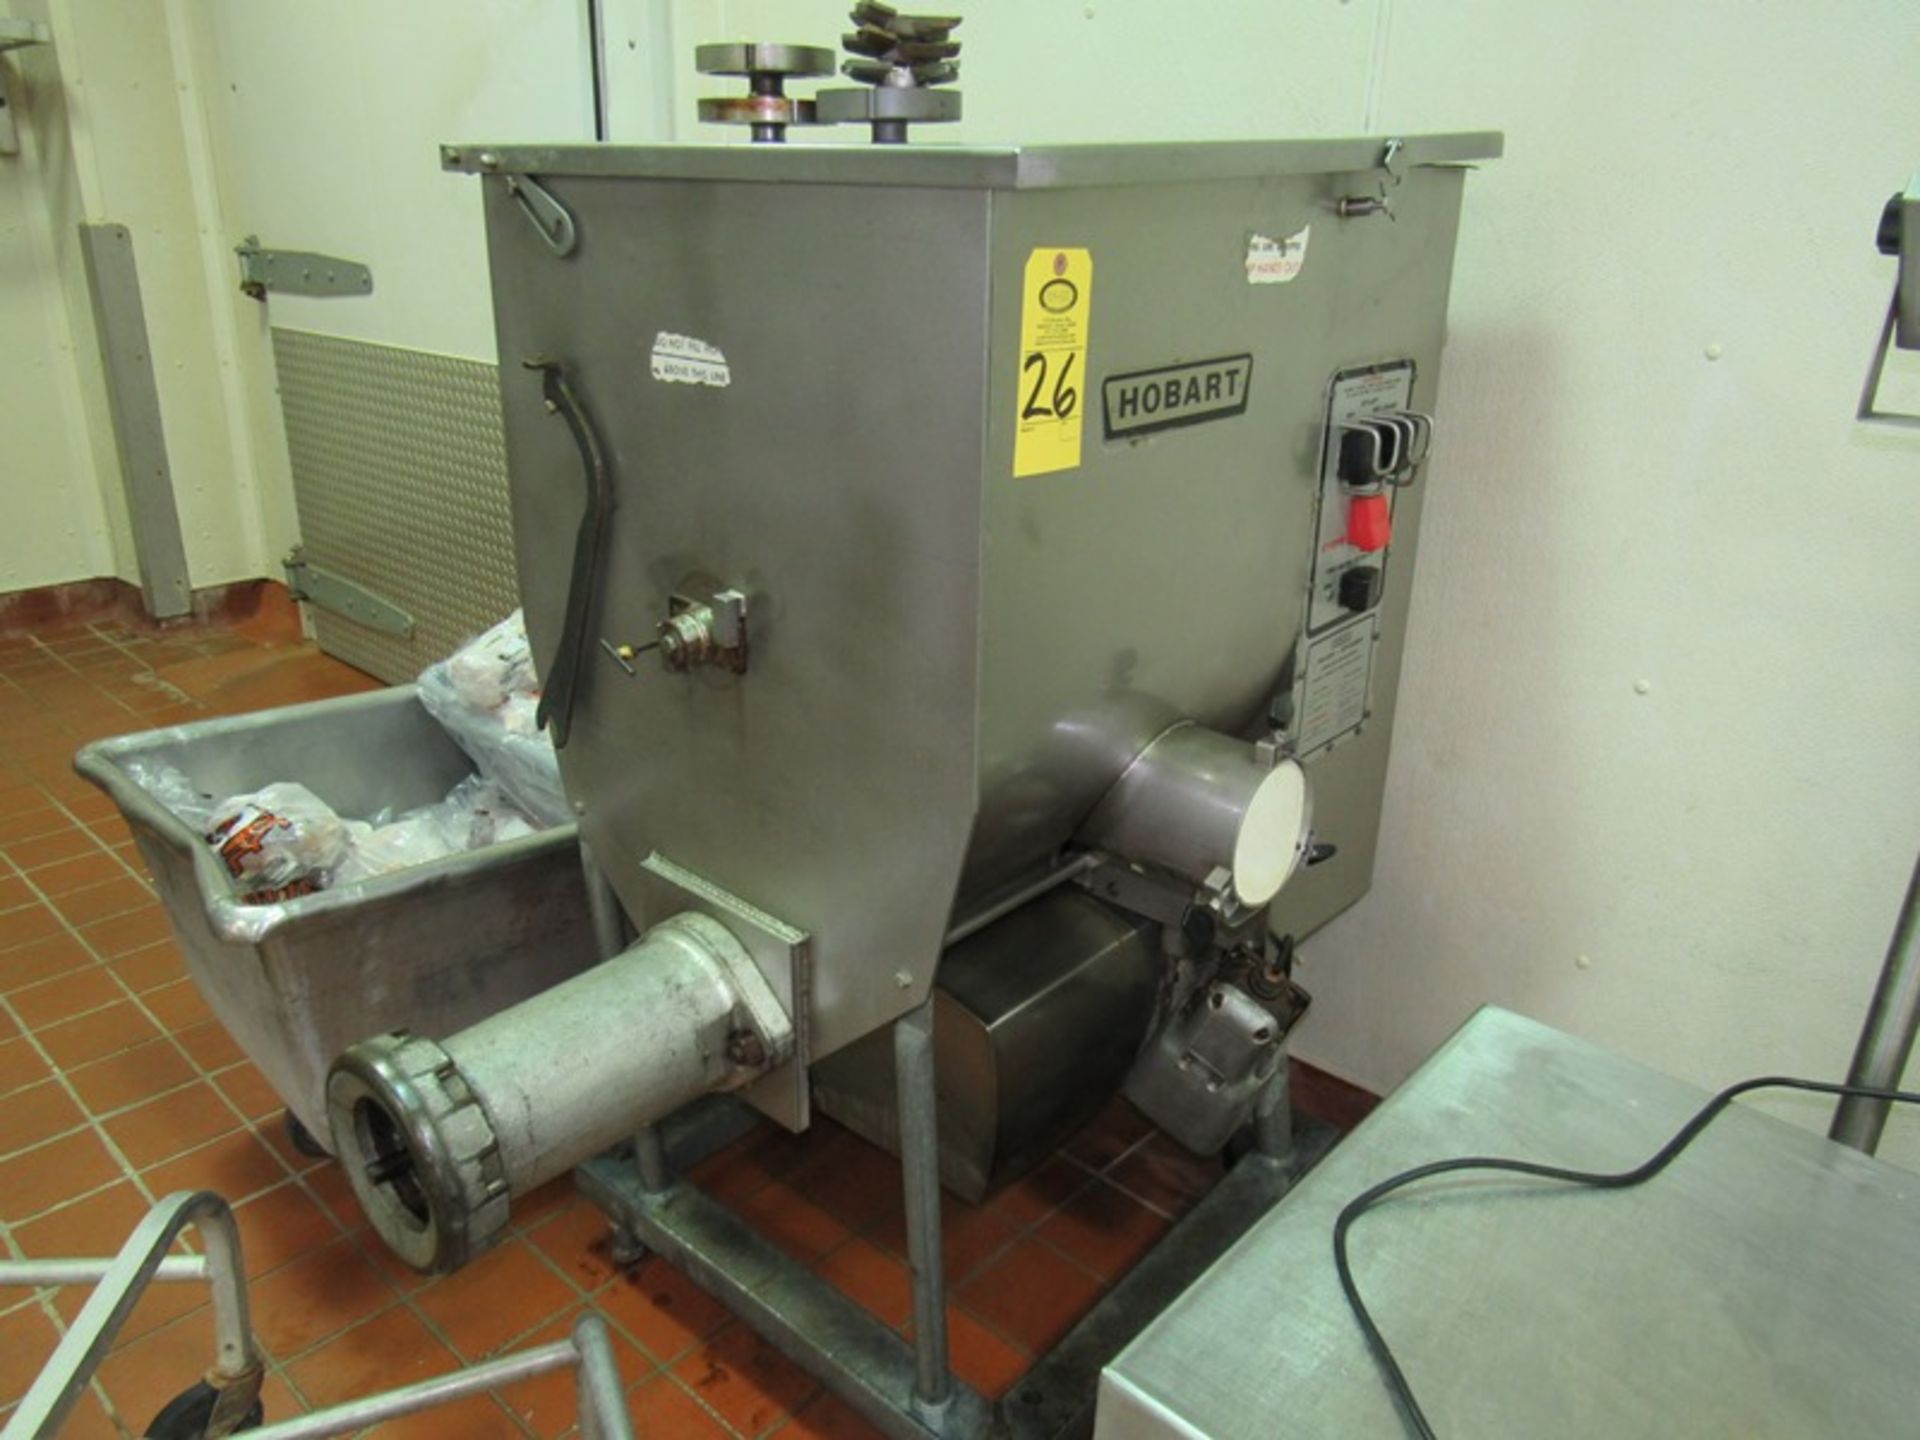 Hobart Mdl. 4352 Mixer/Grinder, 5" head, side automatic load port, foot pedal, 220 volts, 3 phase,